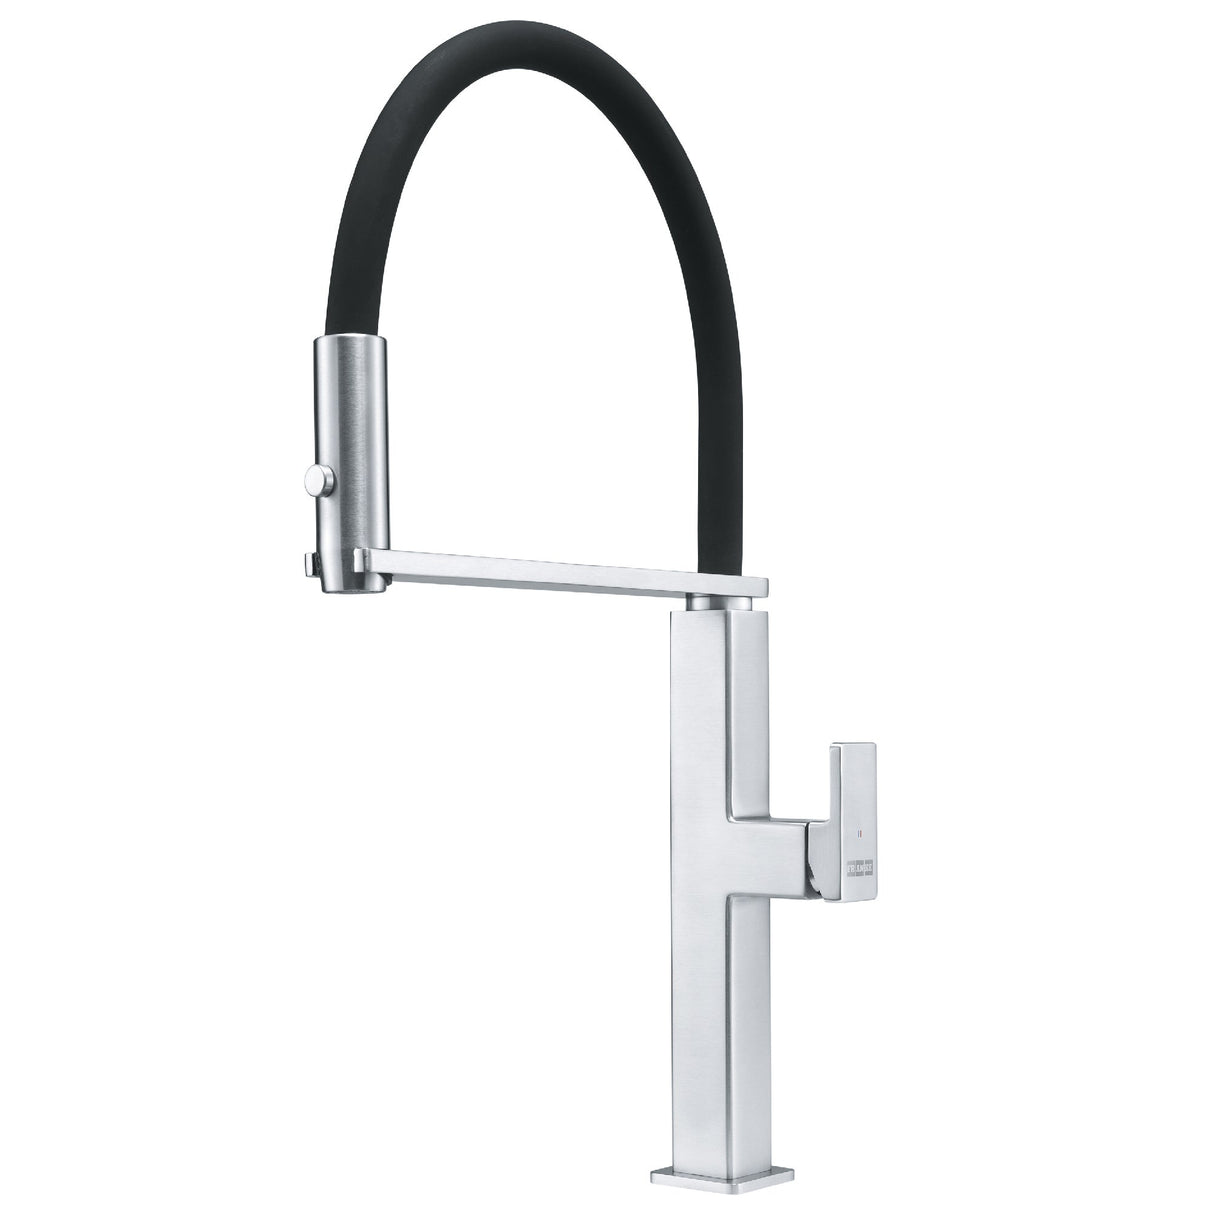 FRANKE CEN-SP-304 Centinox 19.7-inch Semi-Pro Kitchen Faucet in Stainless Steel In Stainless Steel